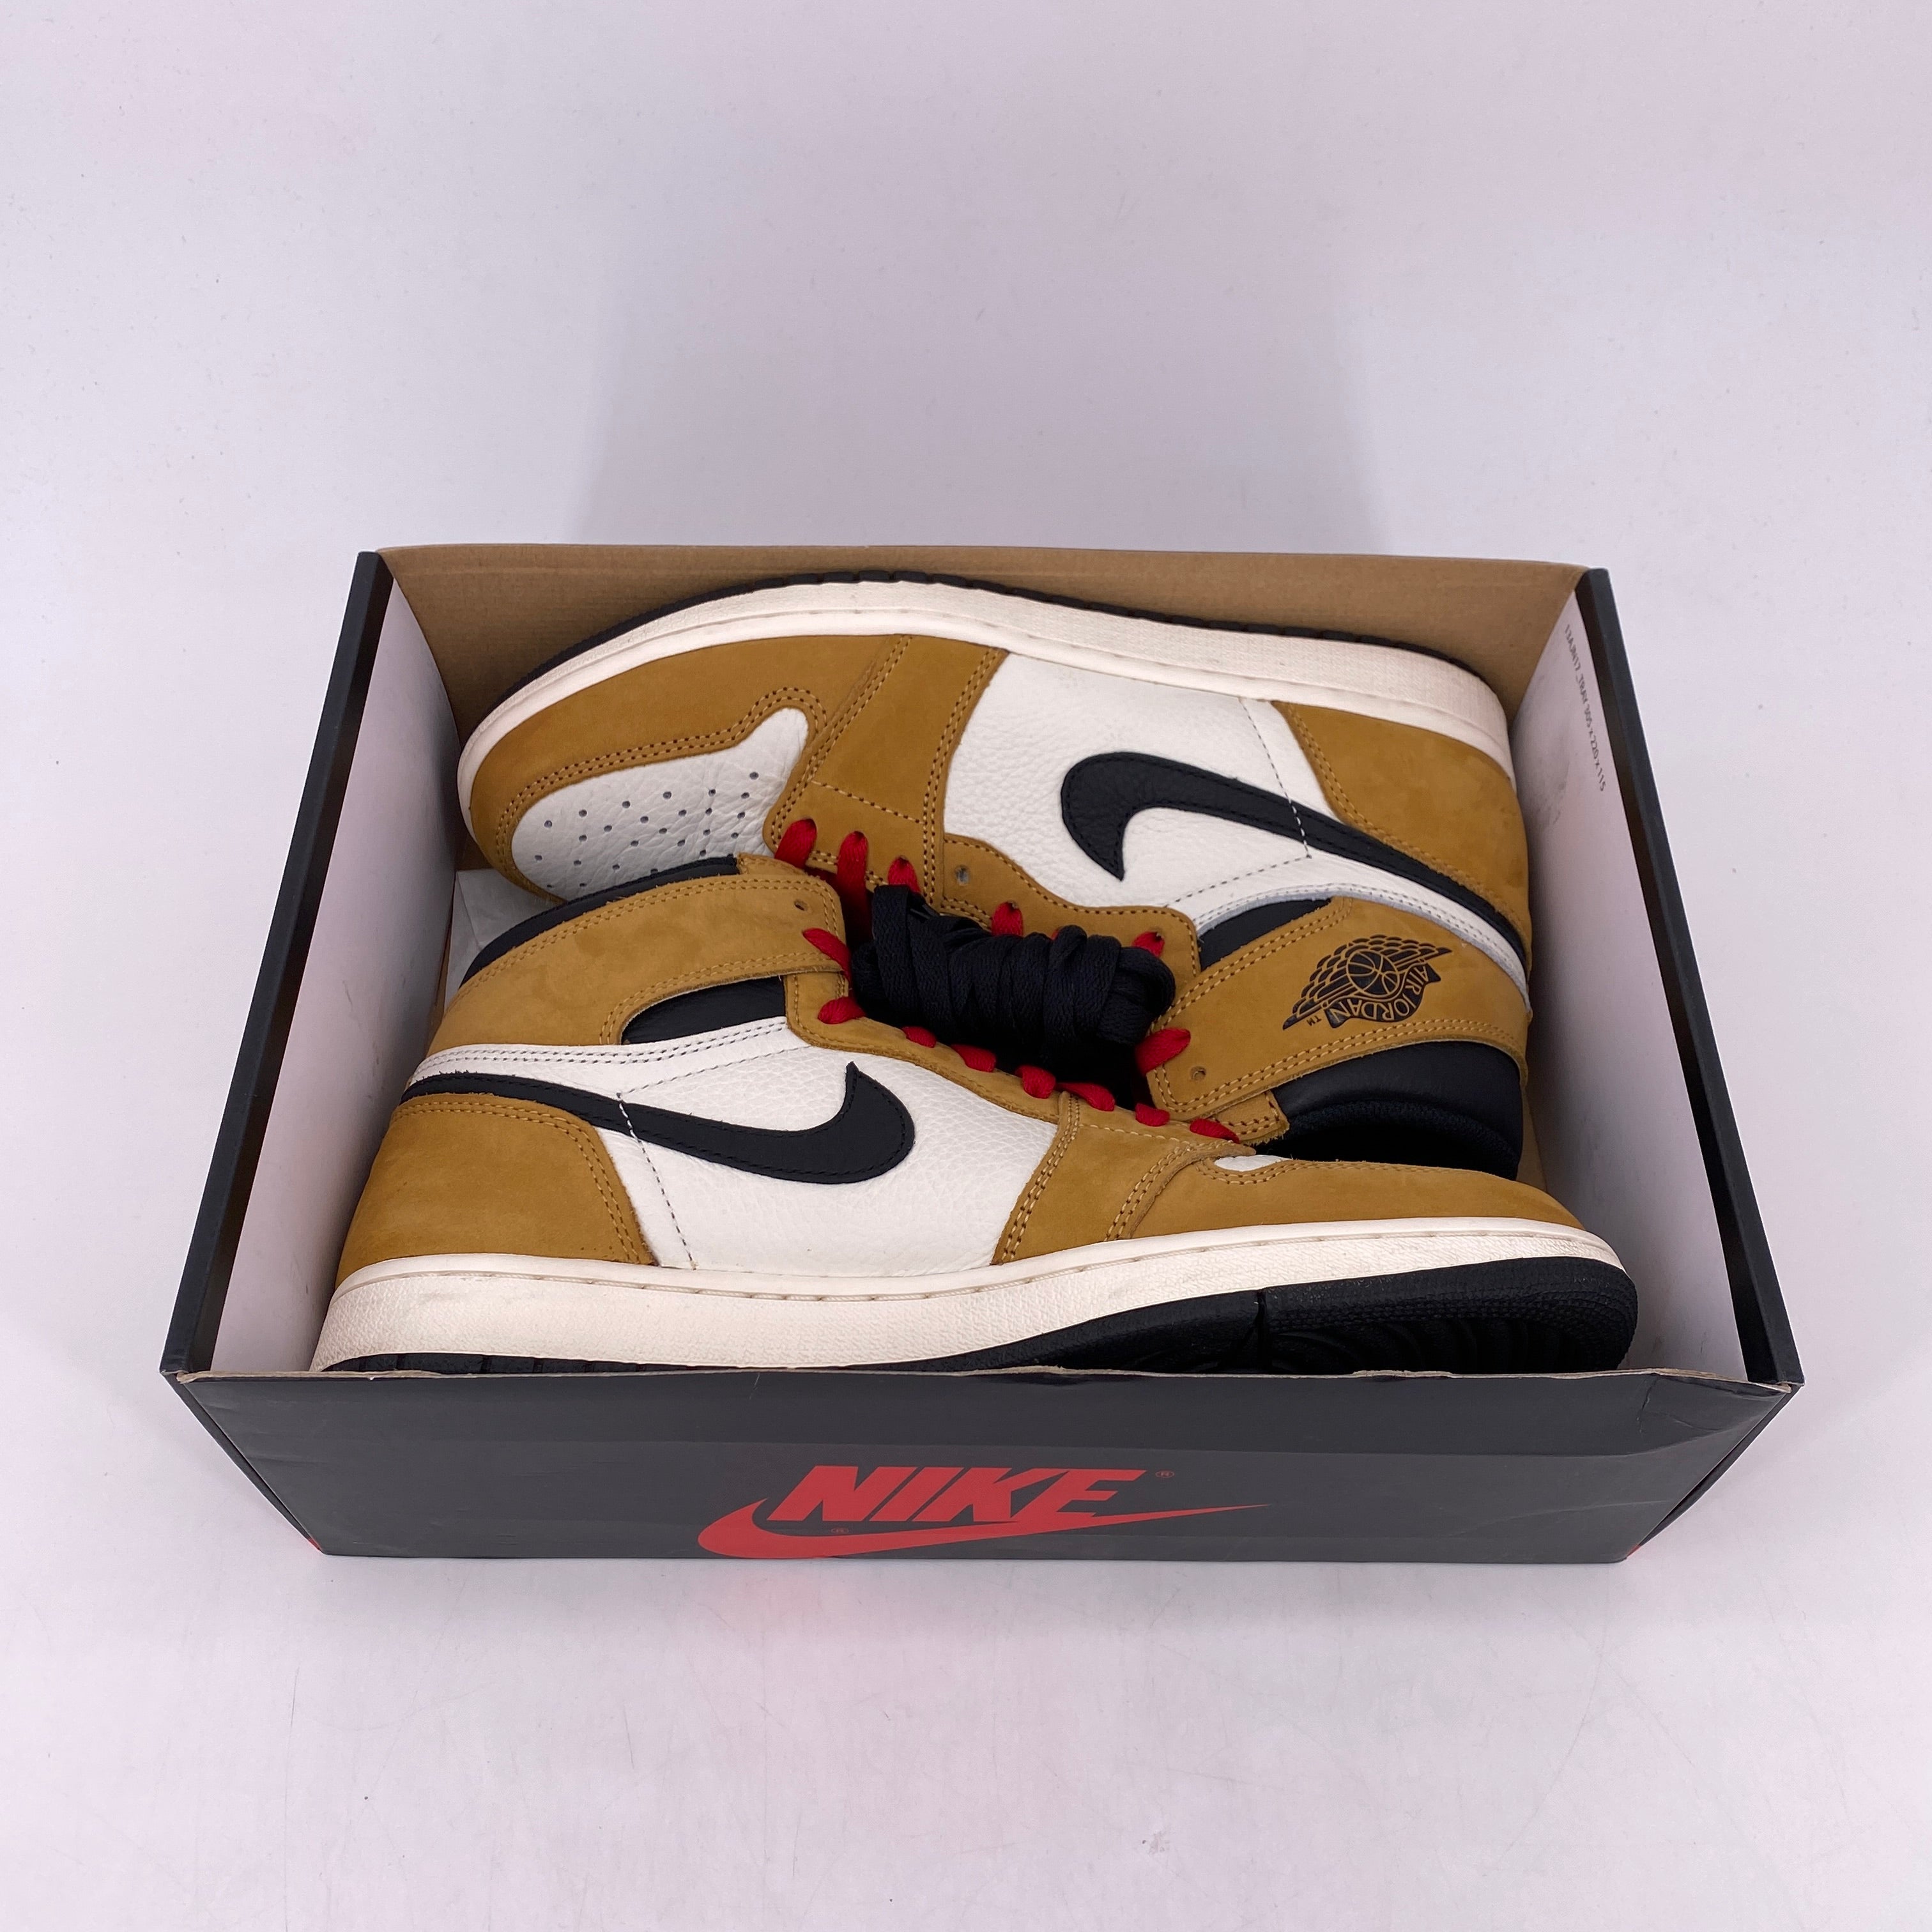 Air Jordan 1 Retro High OG &quot;Rookie Of The Year&quot; 2018 Used Size 9.5